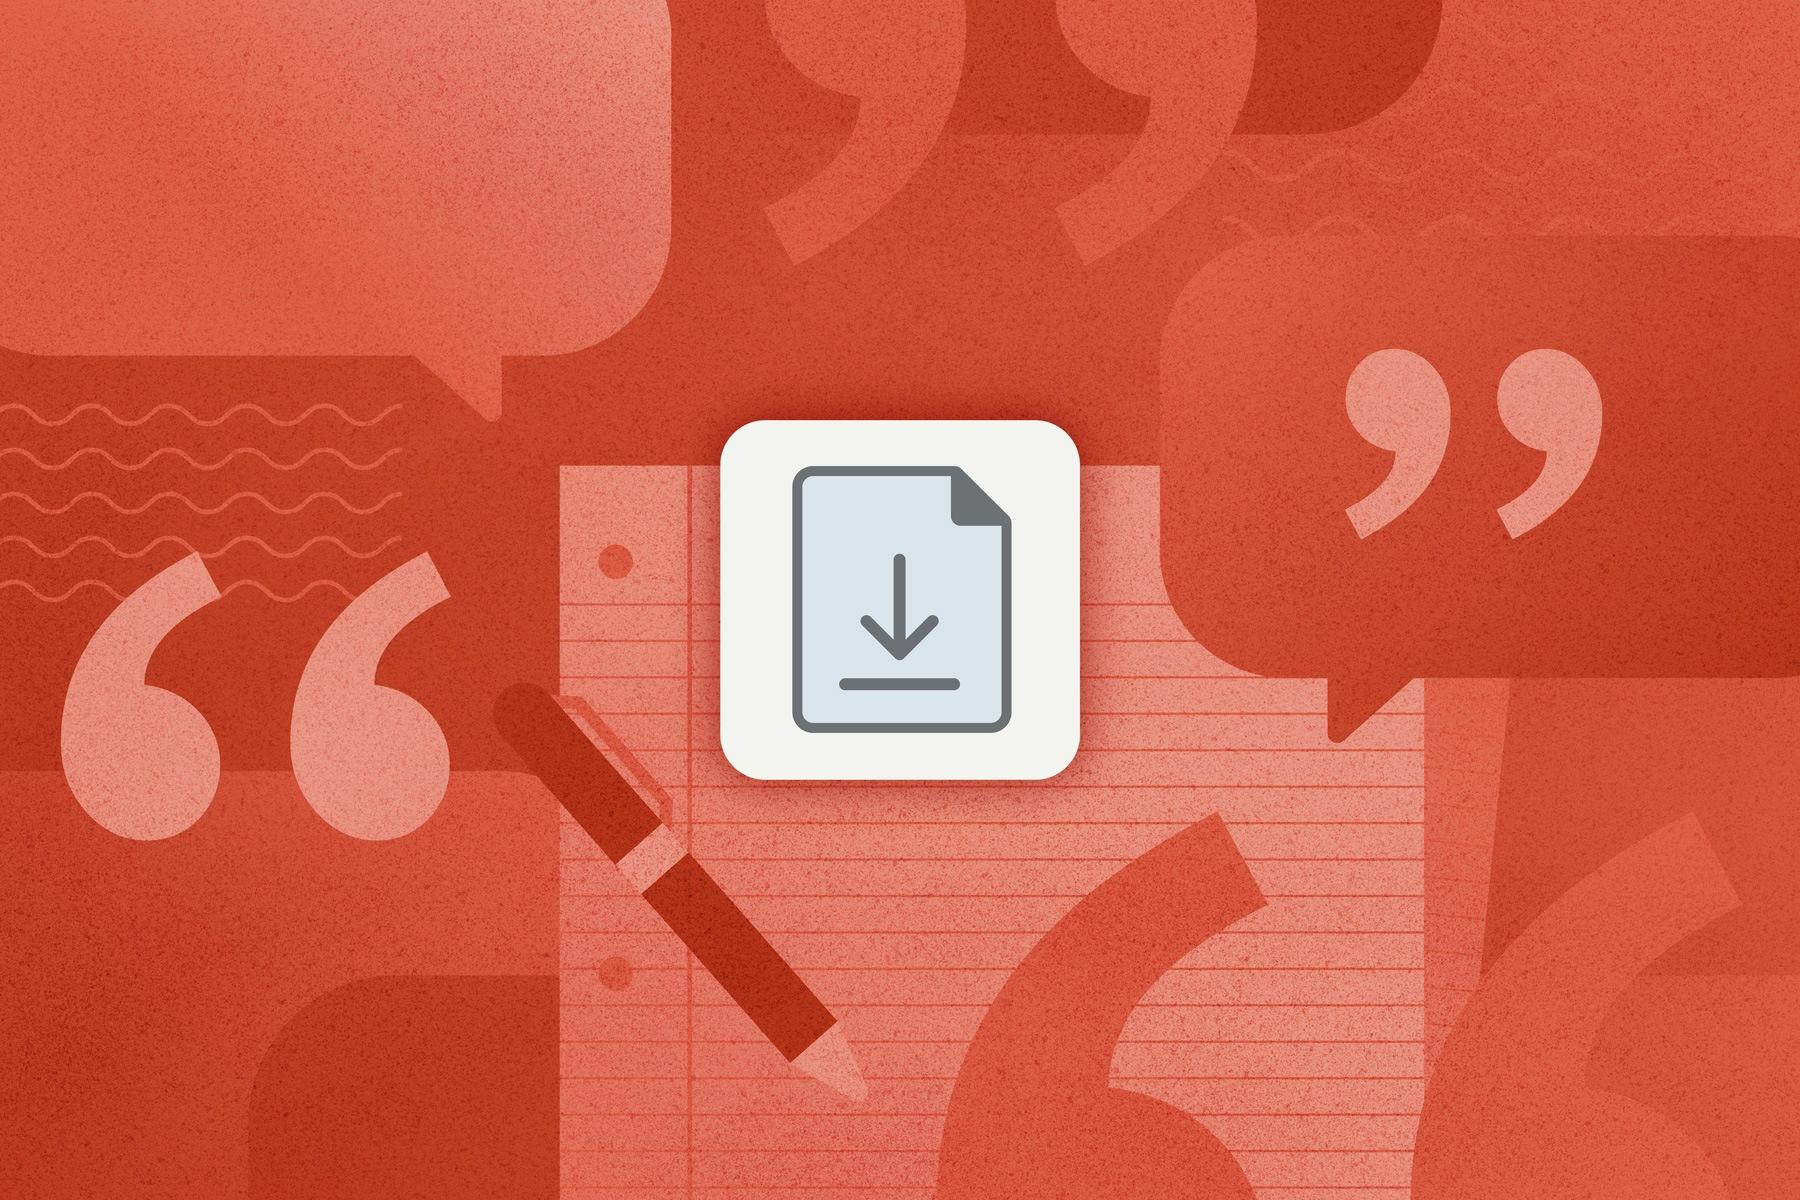 Illustrations of notebook paper, pens and quotation marks, shaded in red. A download icon hovers over the top.